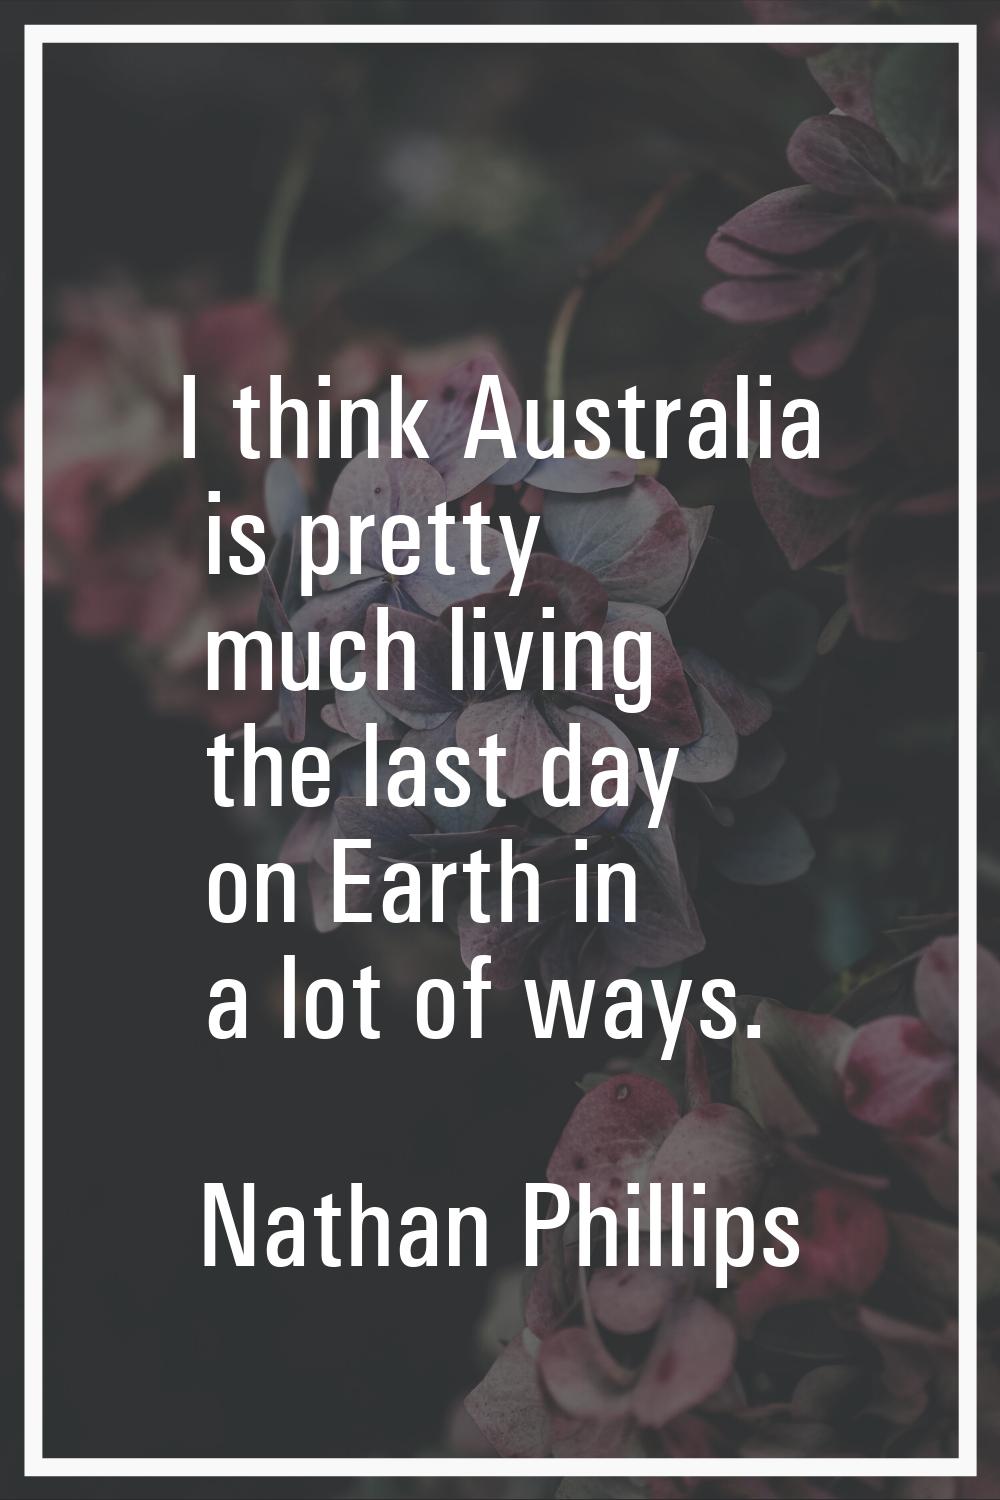 I think Australia is pretty much living the last day on Earth in a lot of ways.